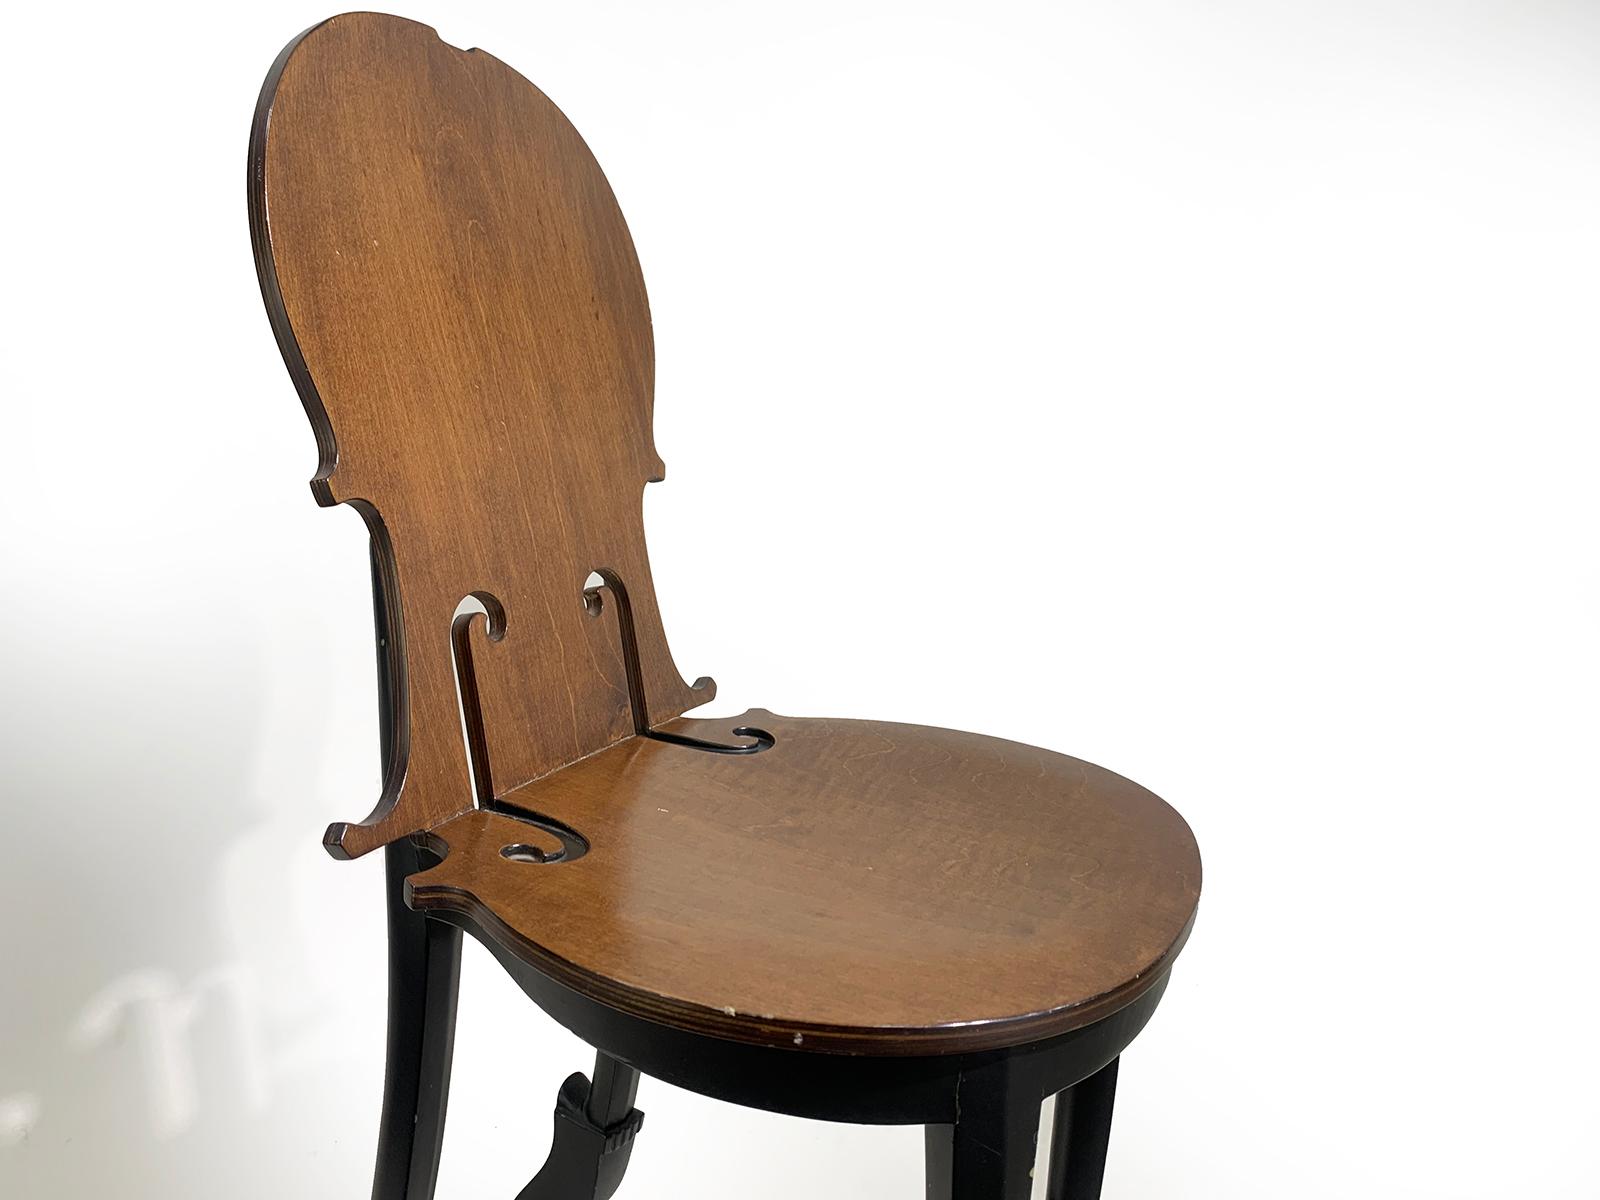 Cello chair by Arman Hugues Chevalier editions n ° 2/50. 
Wood (sycamore and beech), France. 
Signed under the seat on a brass plate.